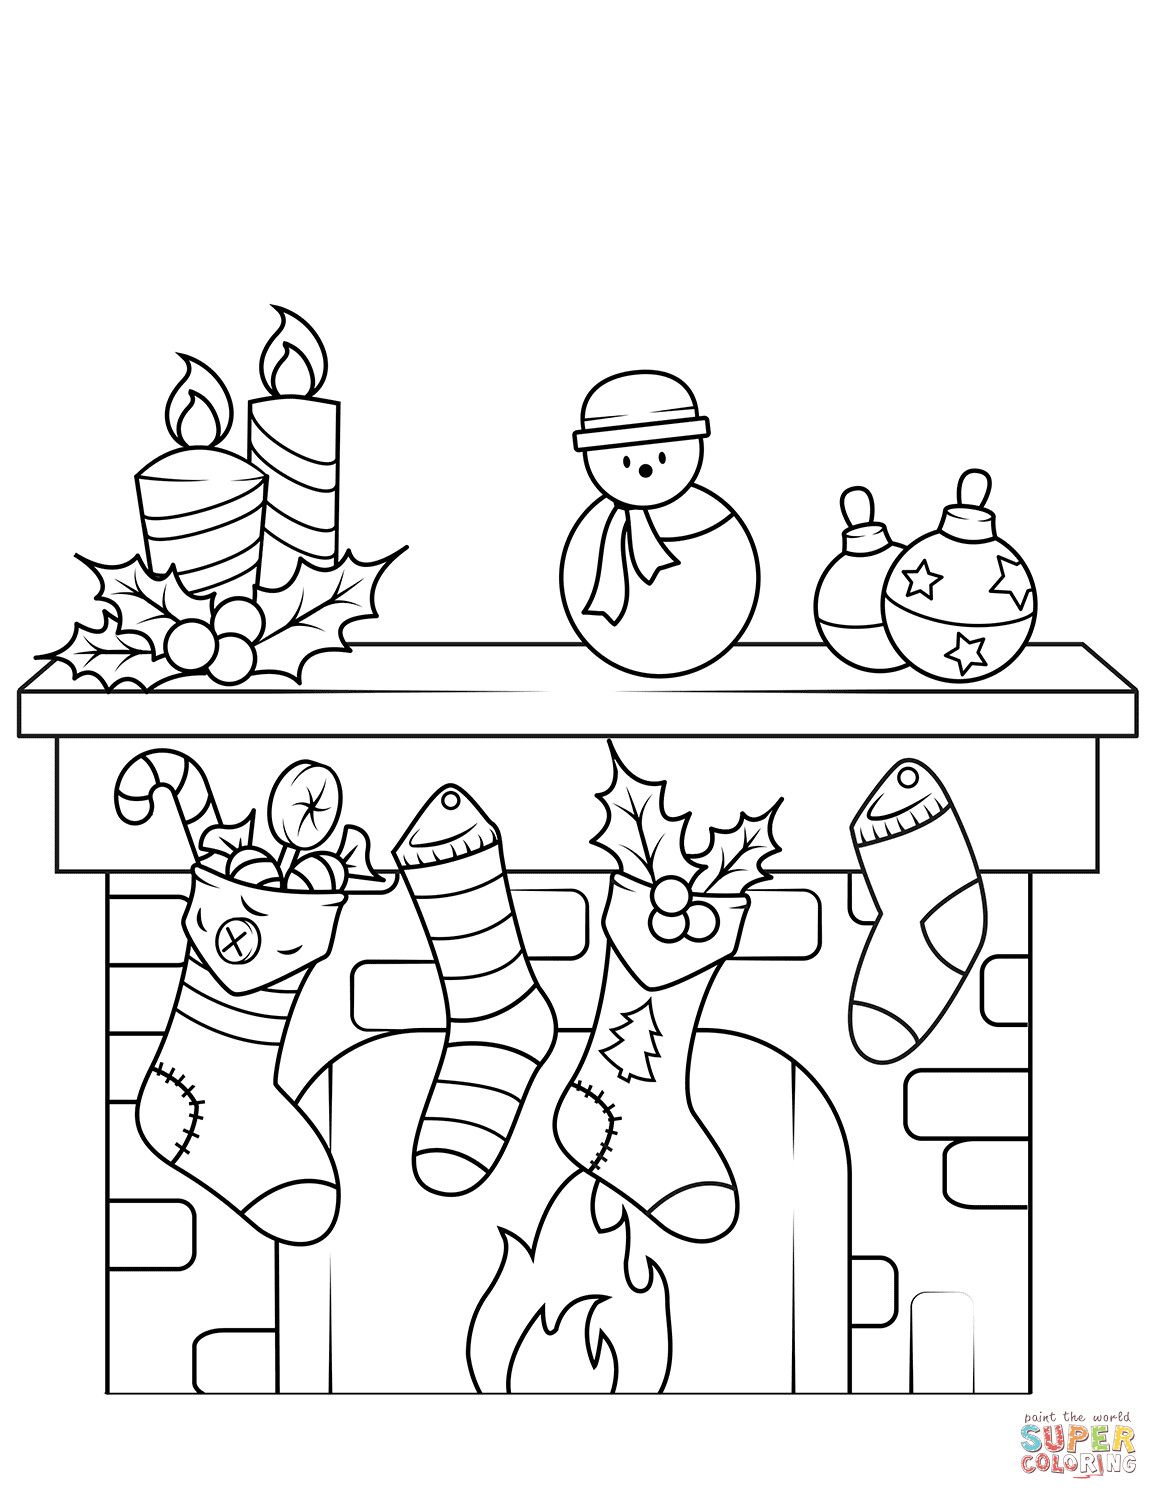 Christmas Fireplace Coloring Page
 Christmas Fireplace coloring page